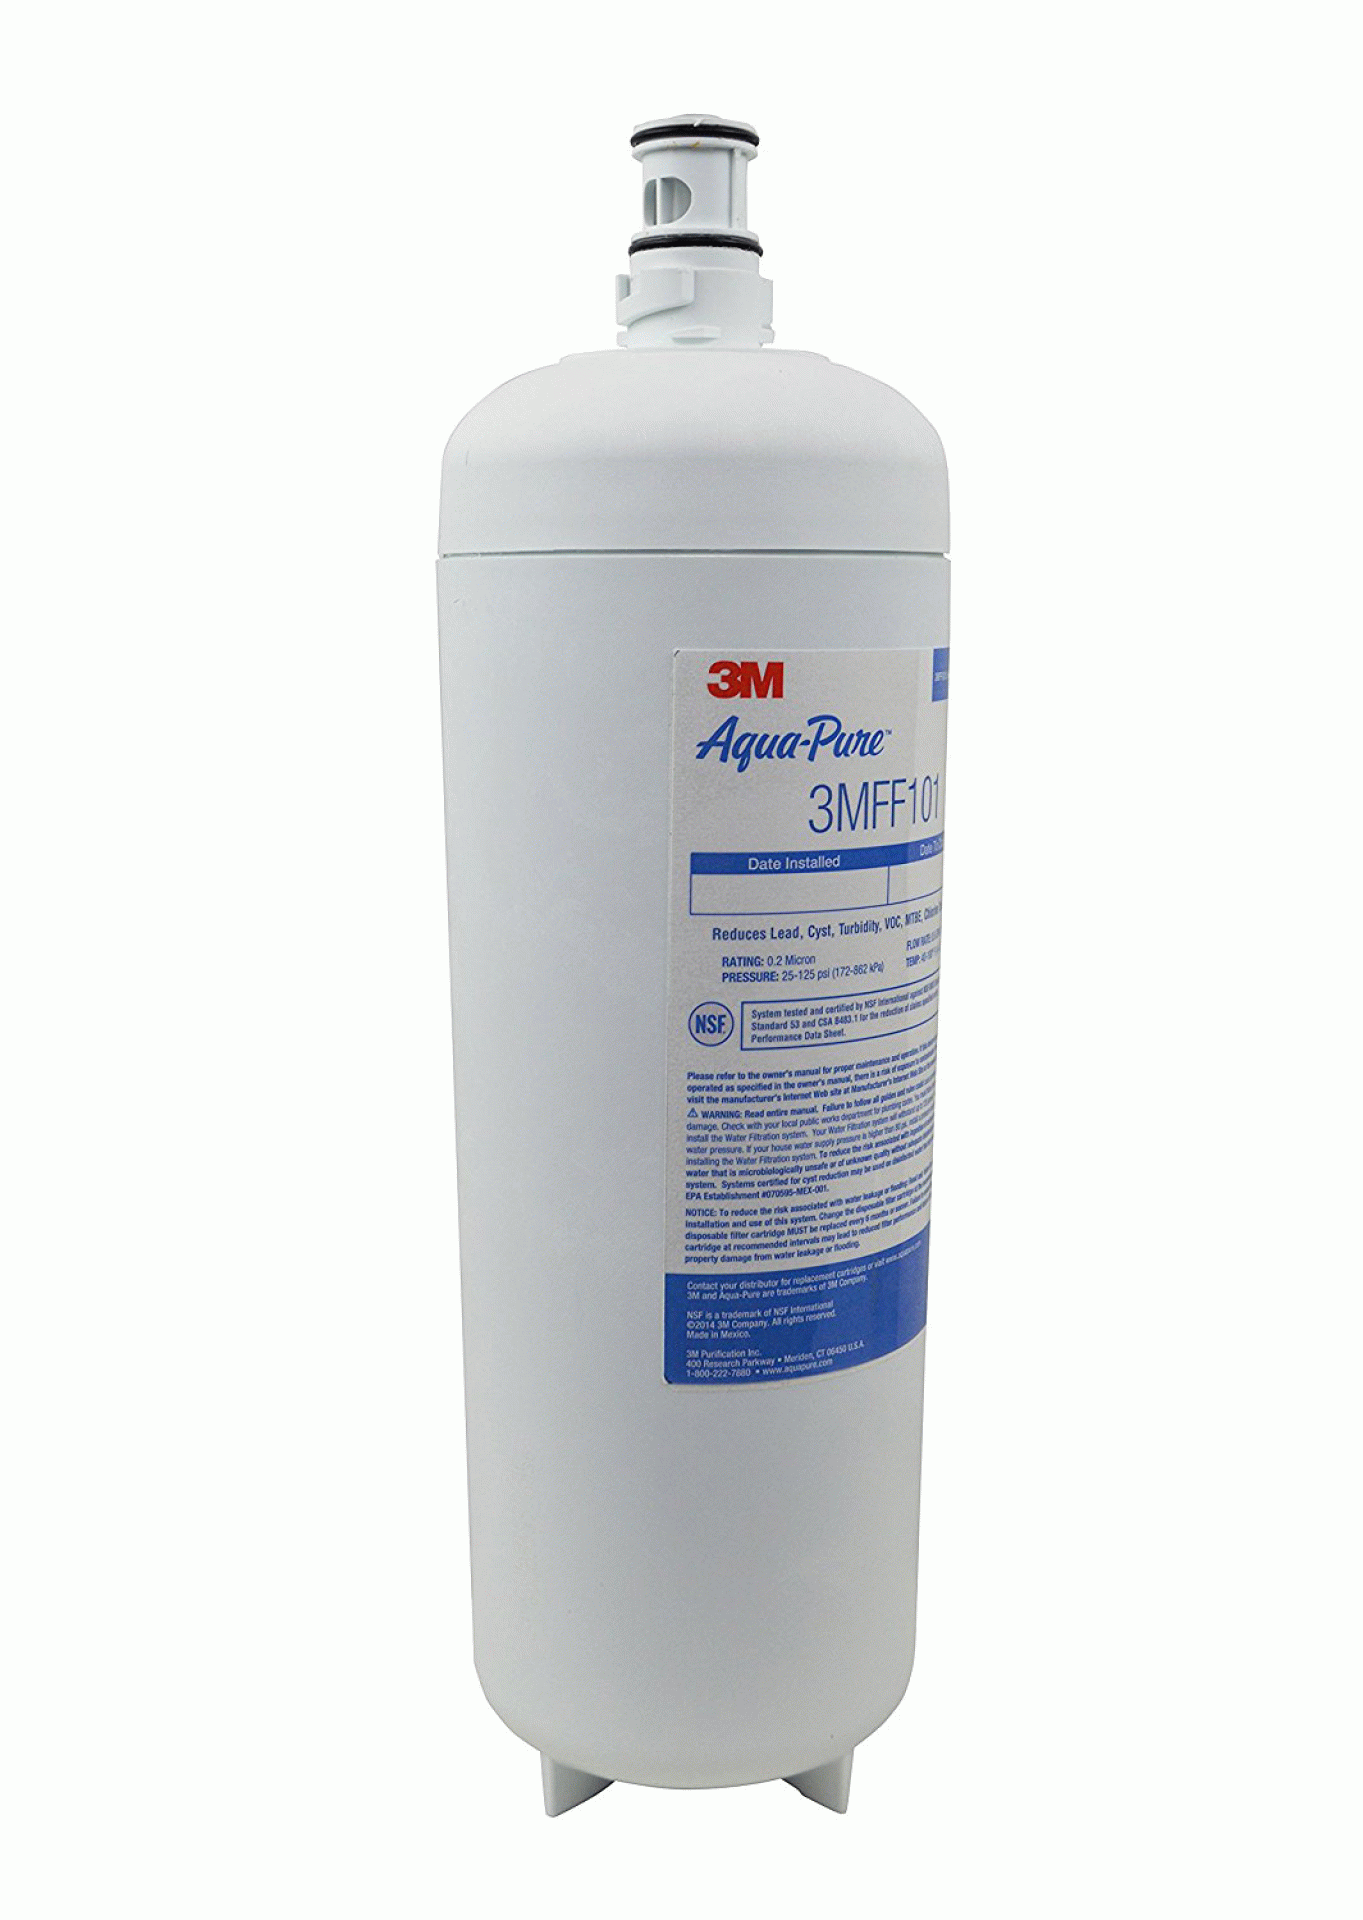 3M Company | 70020249663 | WATER Filter REPLACEMENT for 3MFF101